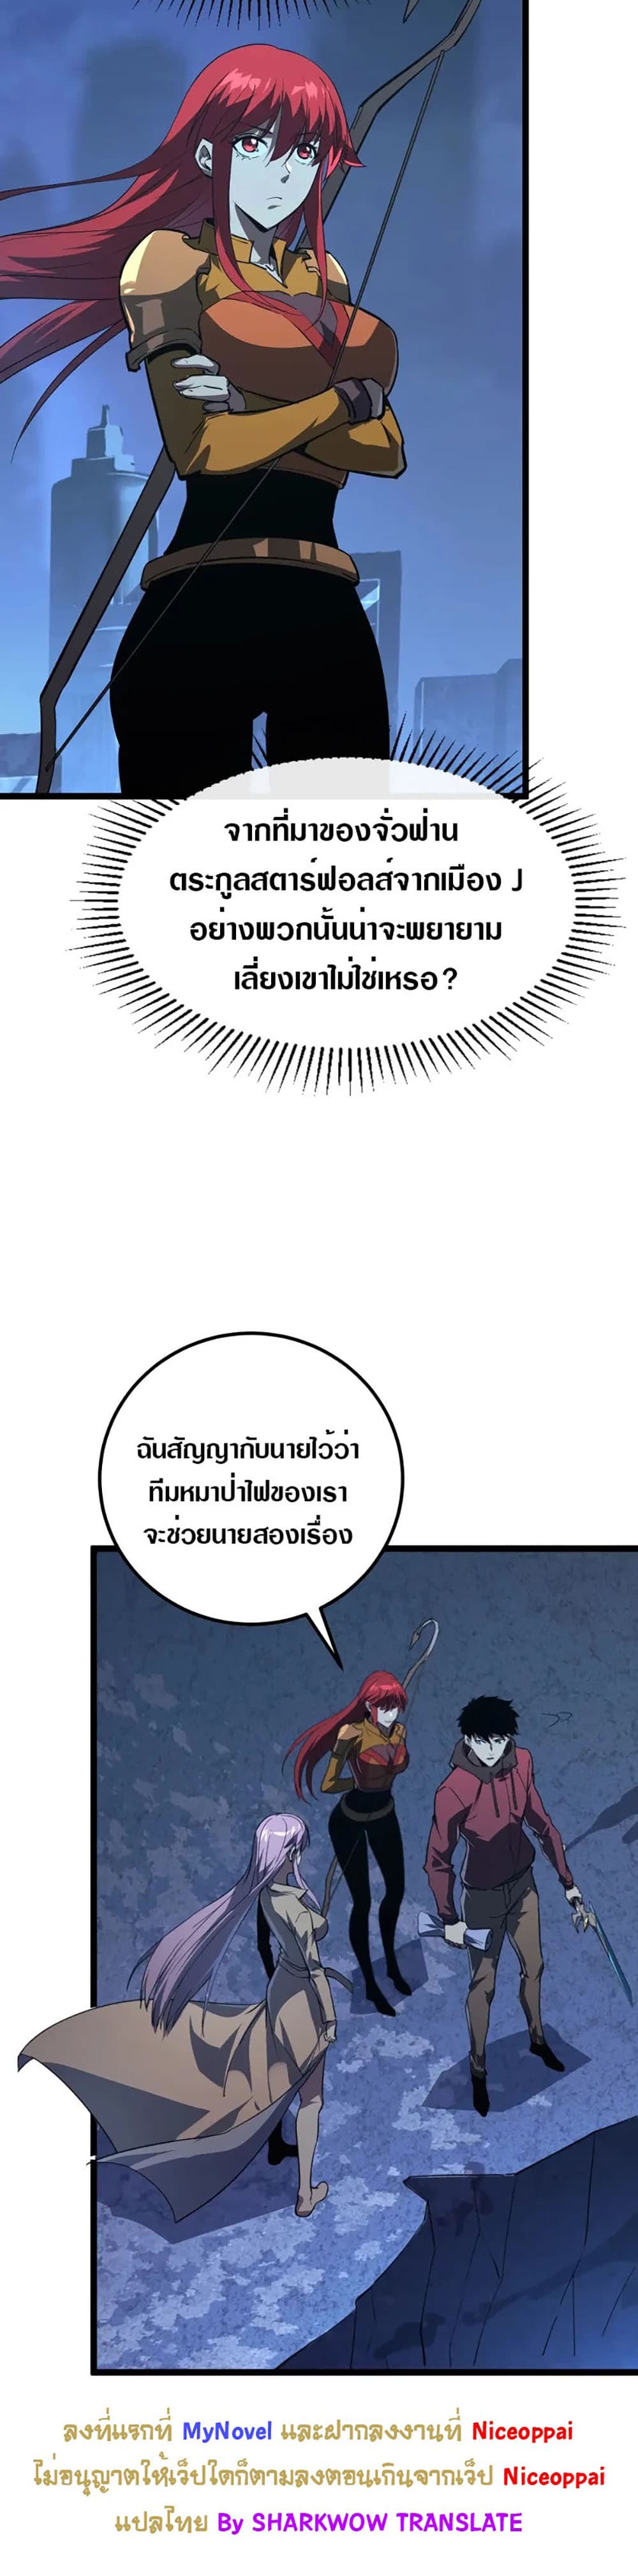 Rise From The Rubble เศษซากวันสิ้นโลก 118-118